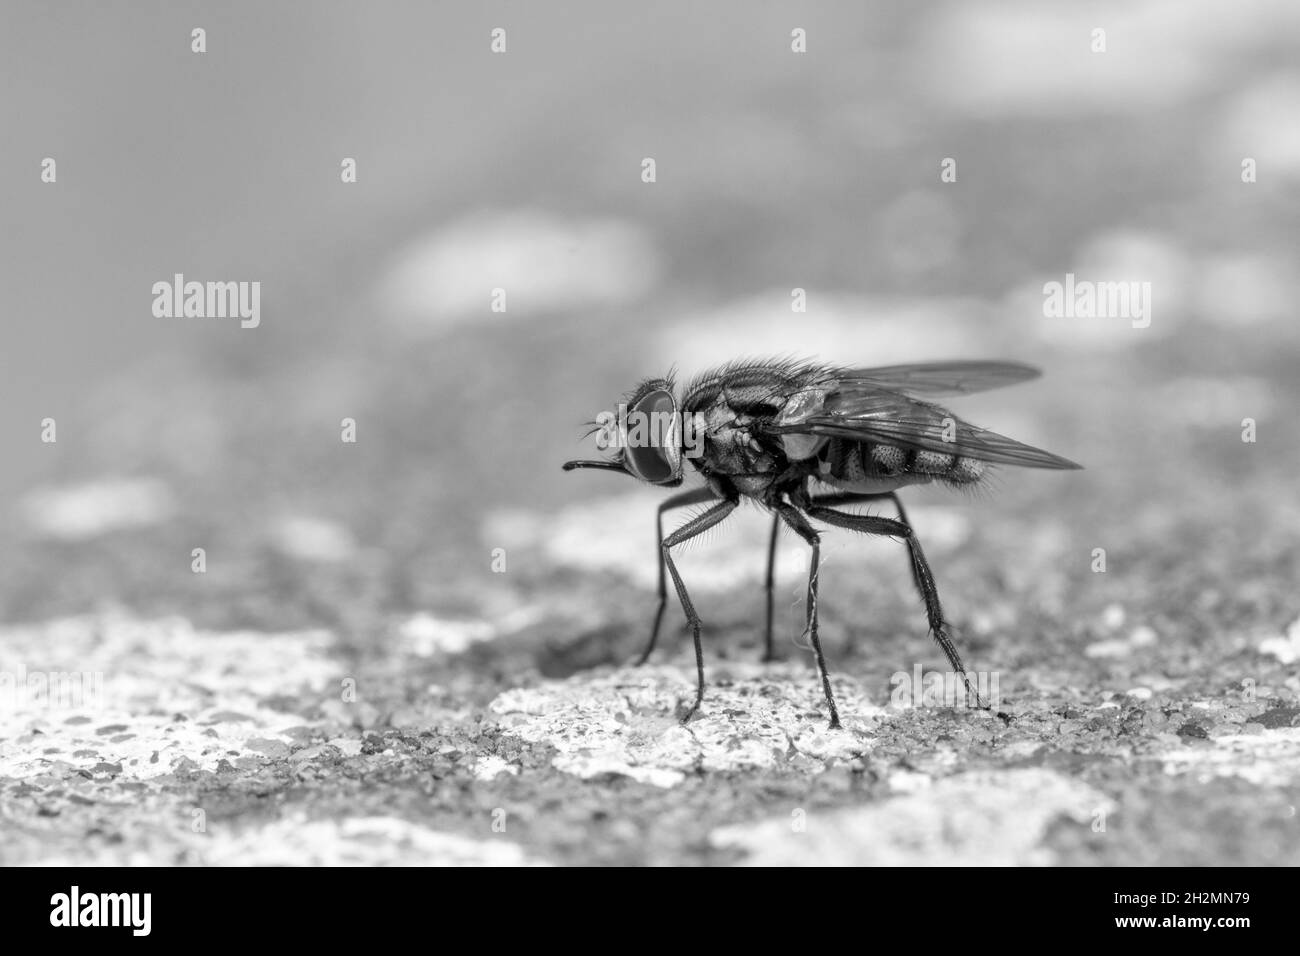 Black and white image of a house fly (Musca domestica) on a cement wall Stock Photo